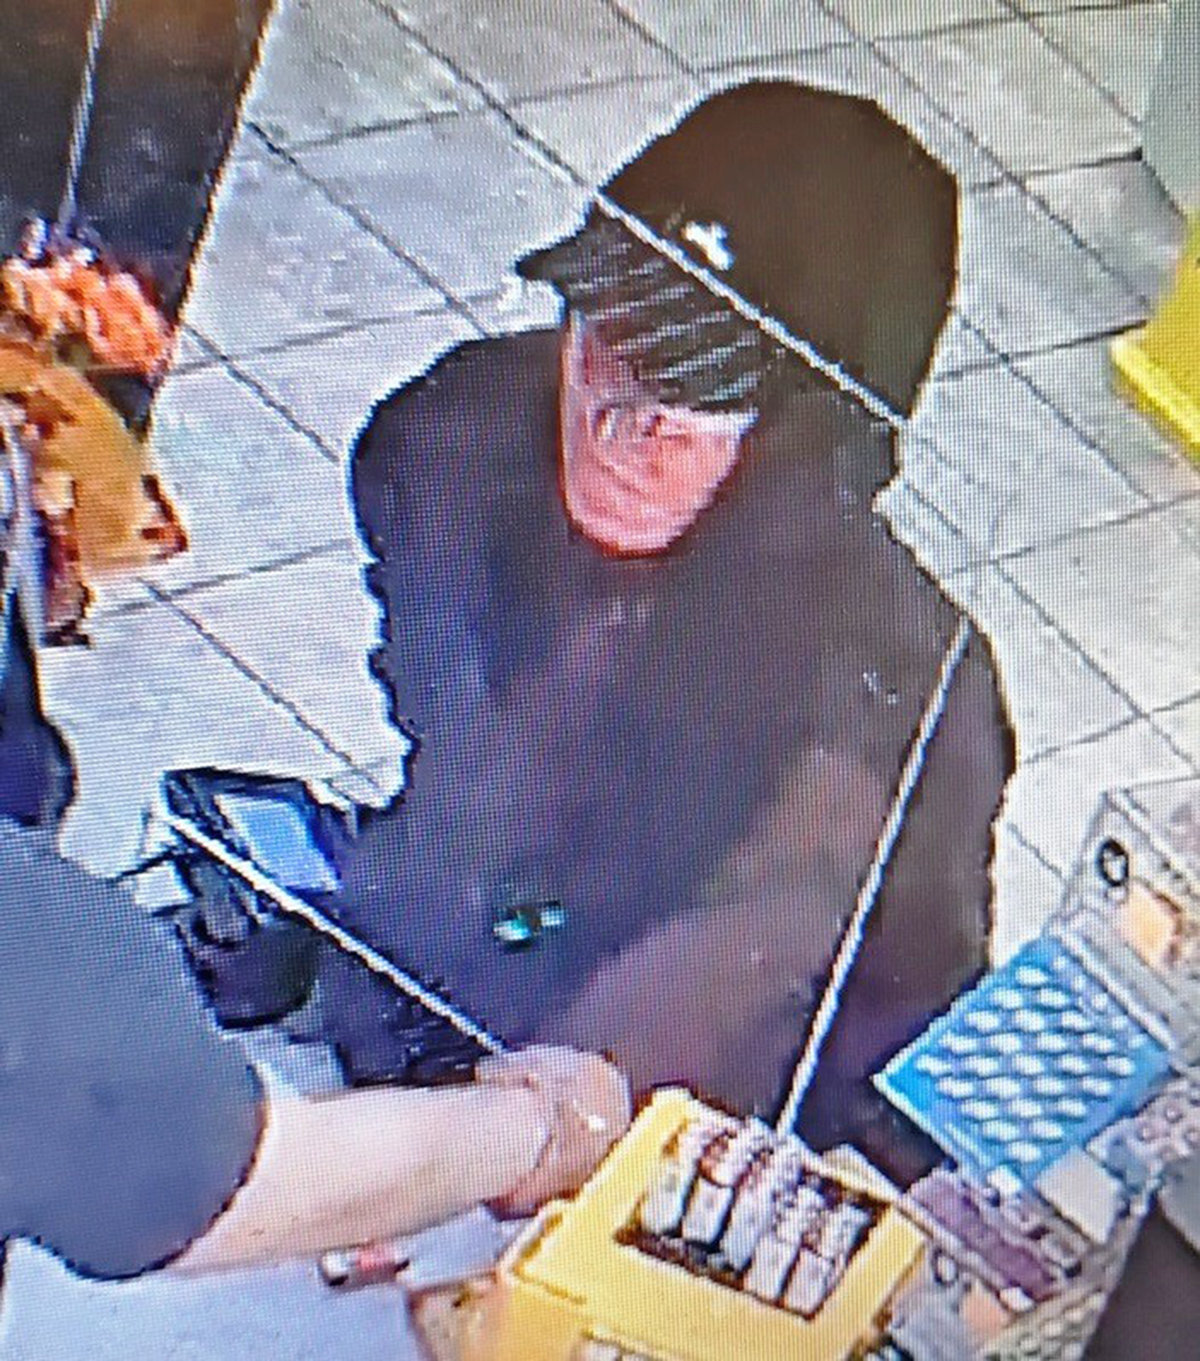 SUSPECT — This white male entered the Cliff’s Local Market on Utica Street in Clinton Monday night and demanded money from the clerk. State police said there was no weapon or any threats of violence. Anyone with information on the attempted robbery is asked to call state police at 315-366-6000.